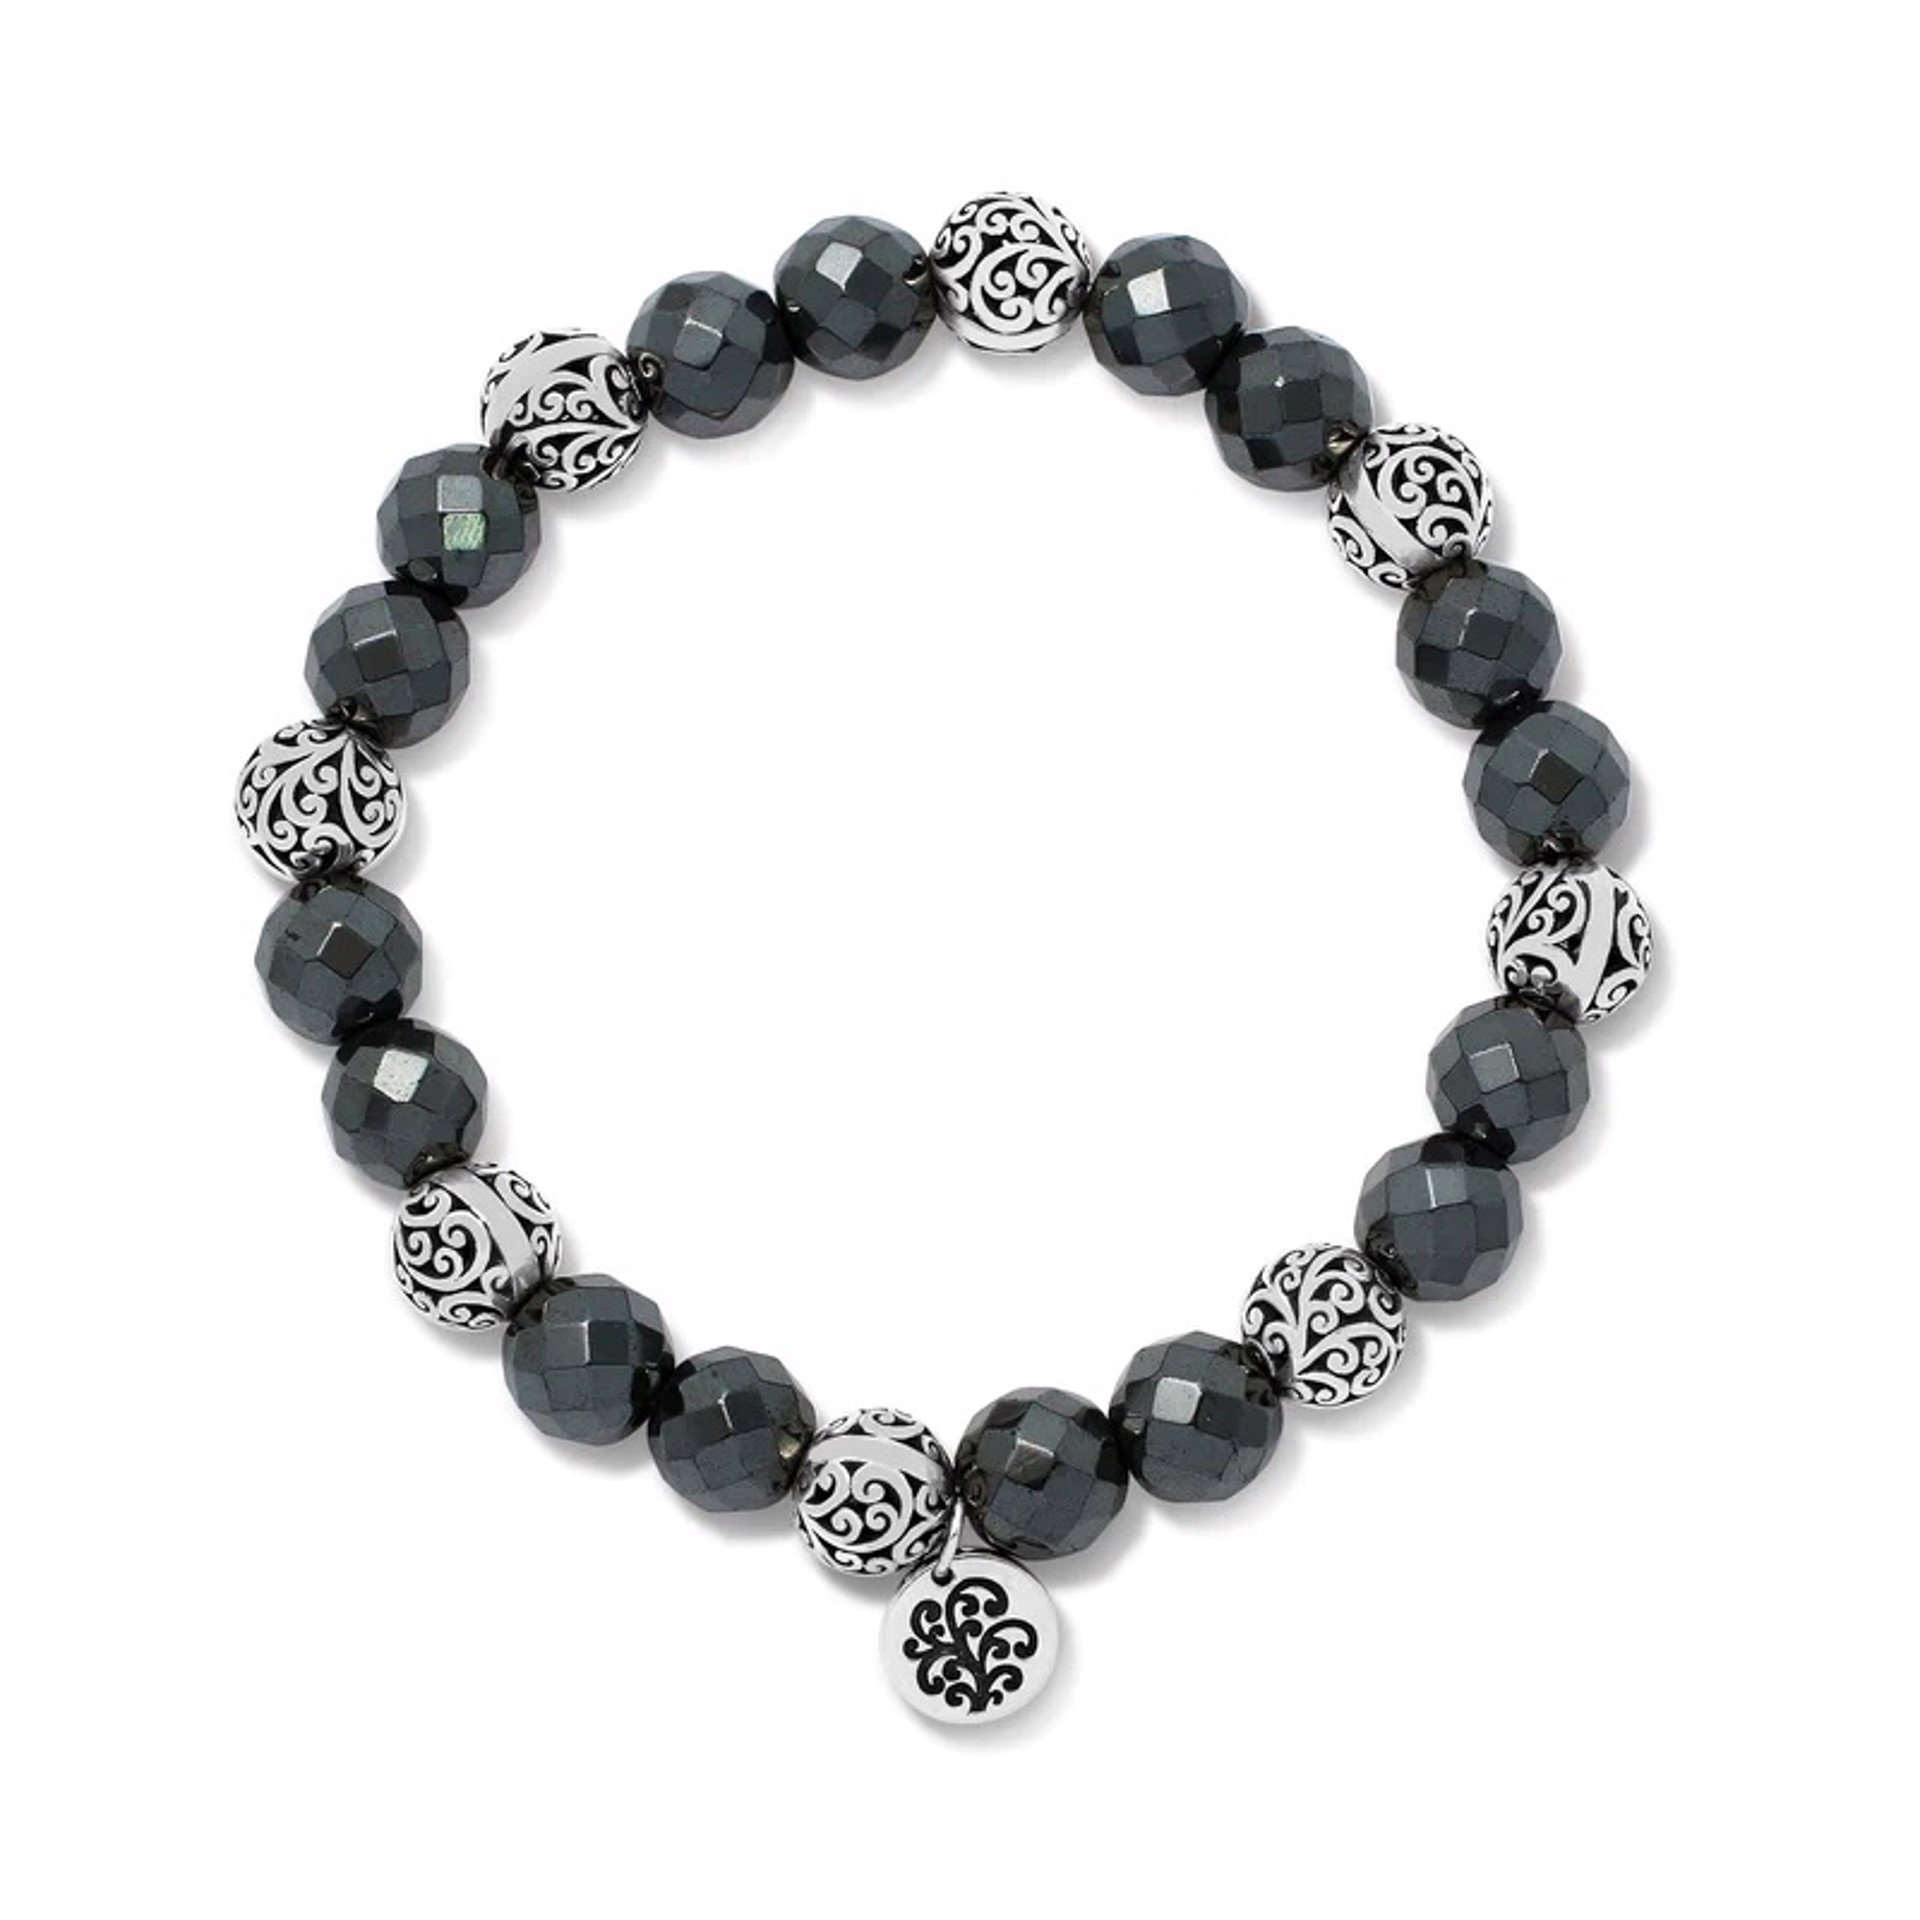 6937 Hematite and LH Scroll Beads Every Two Alternated by Lois Hill